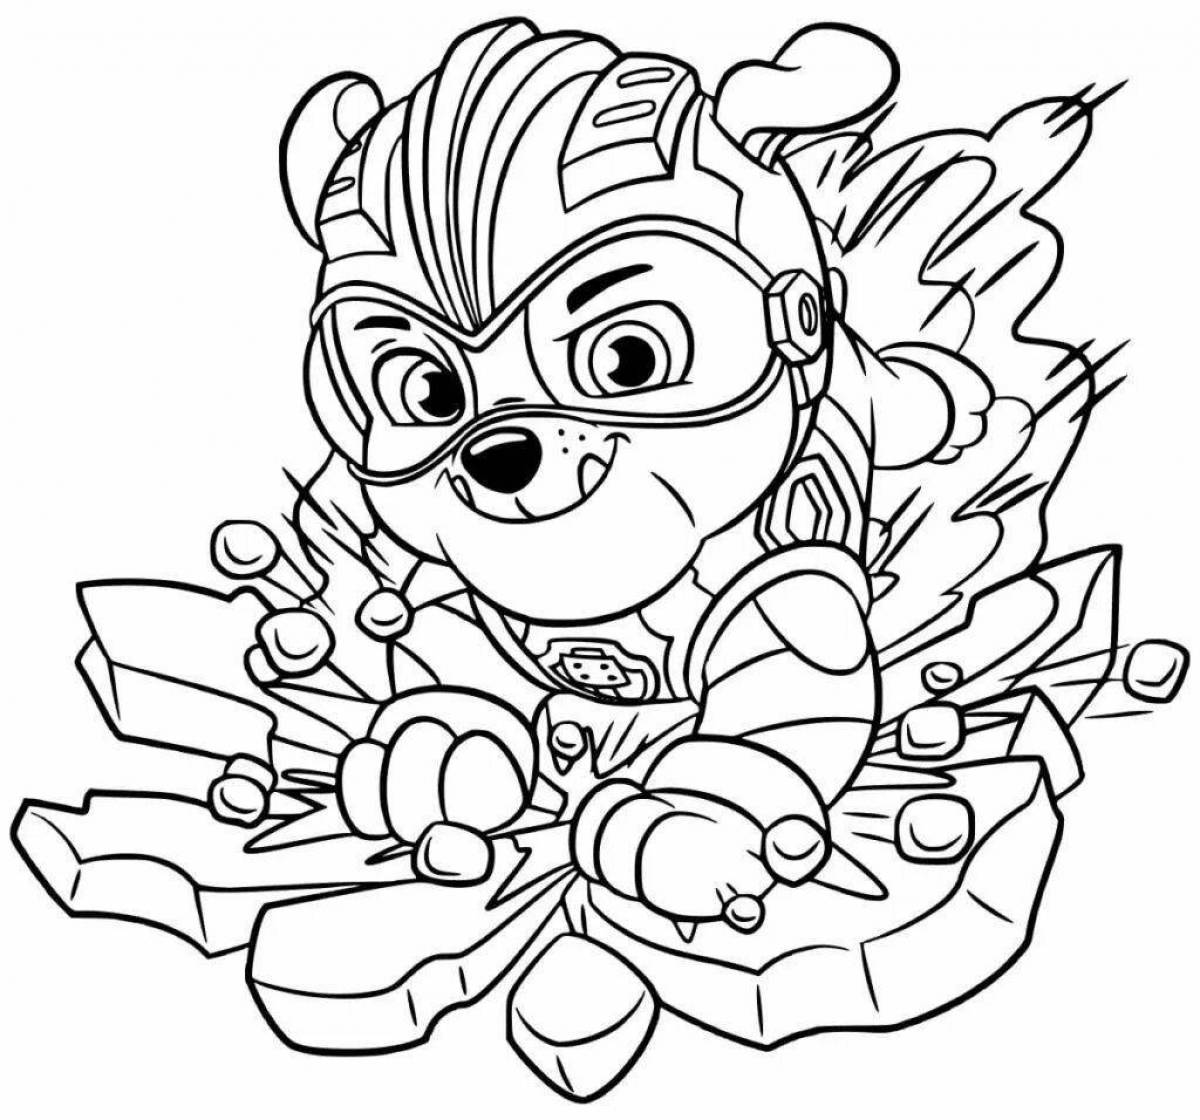 Paw Patrol shining puppies coloring page